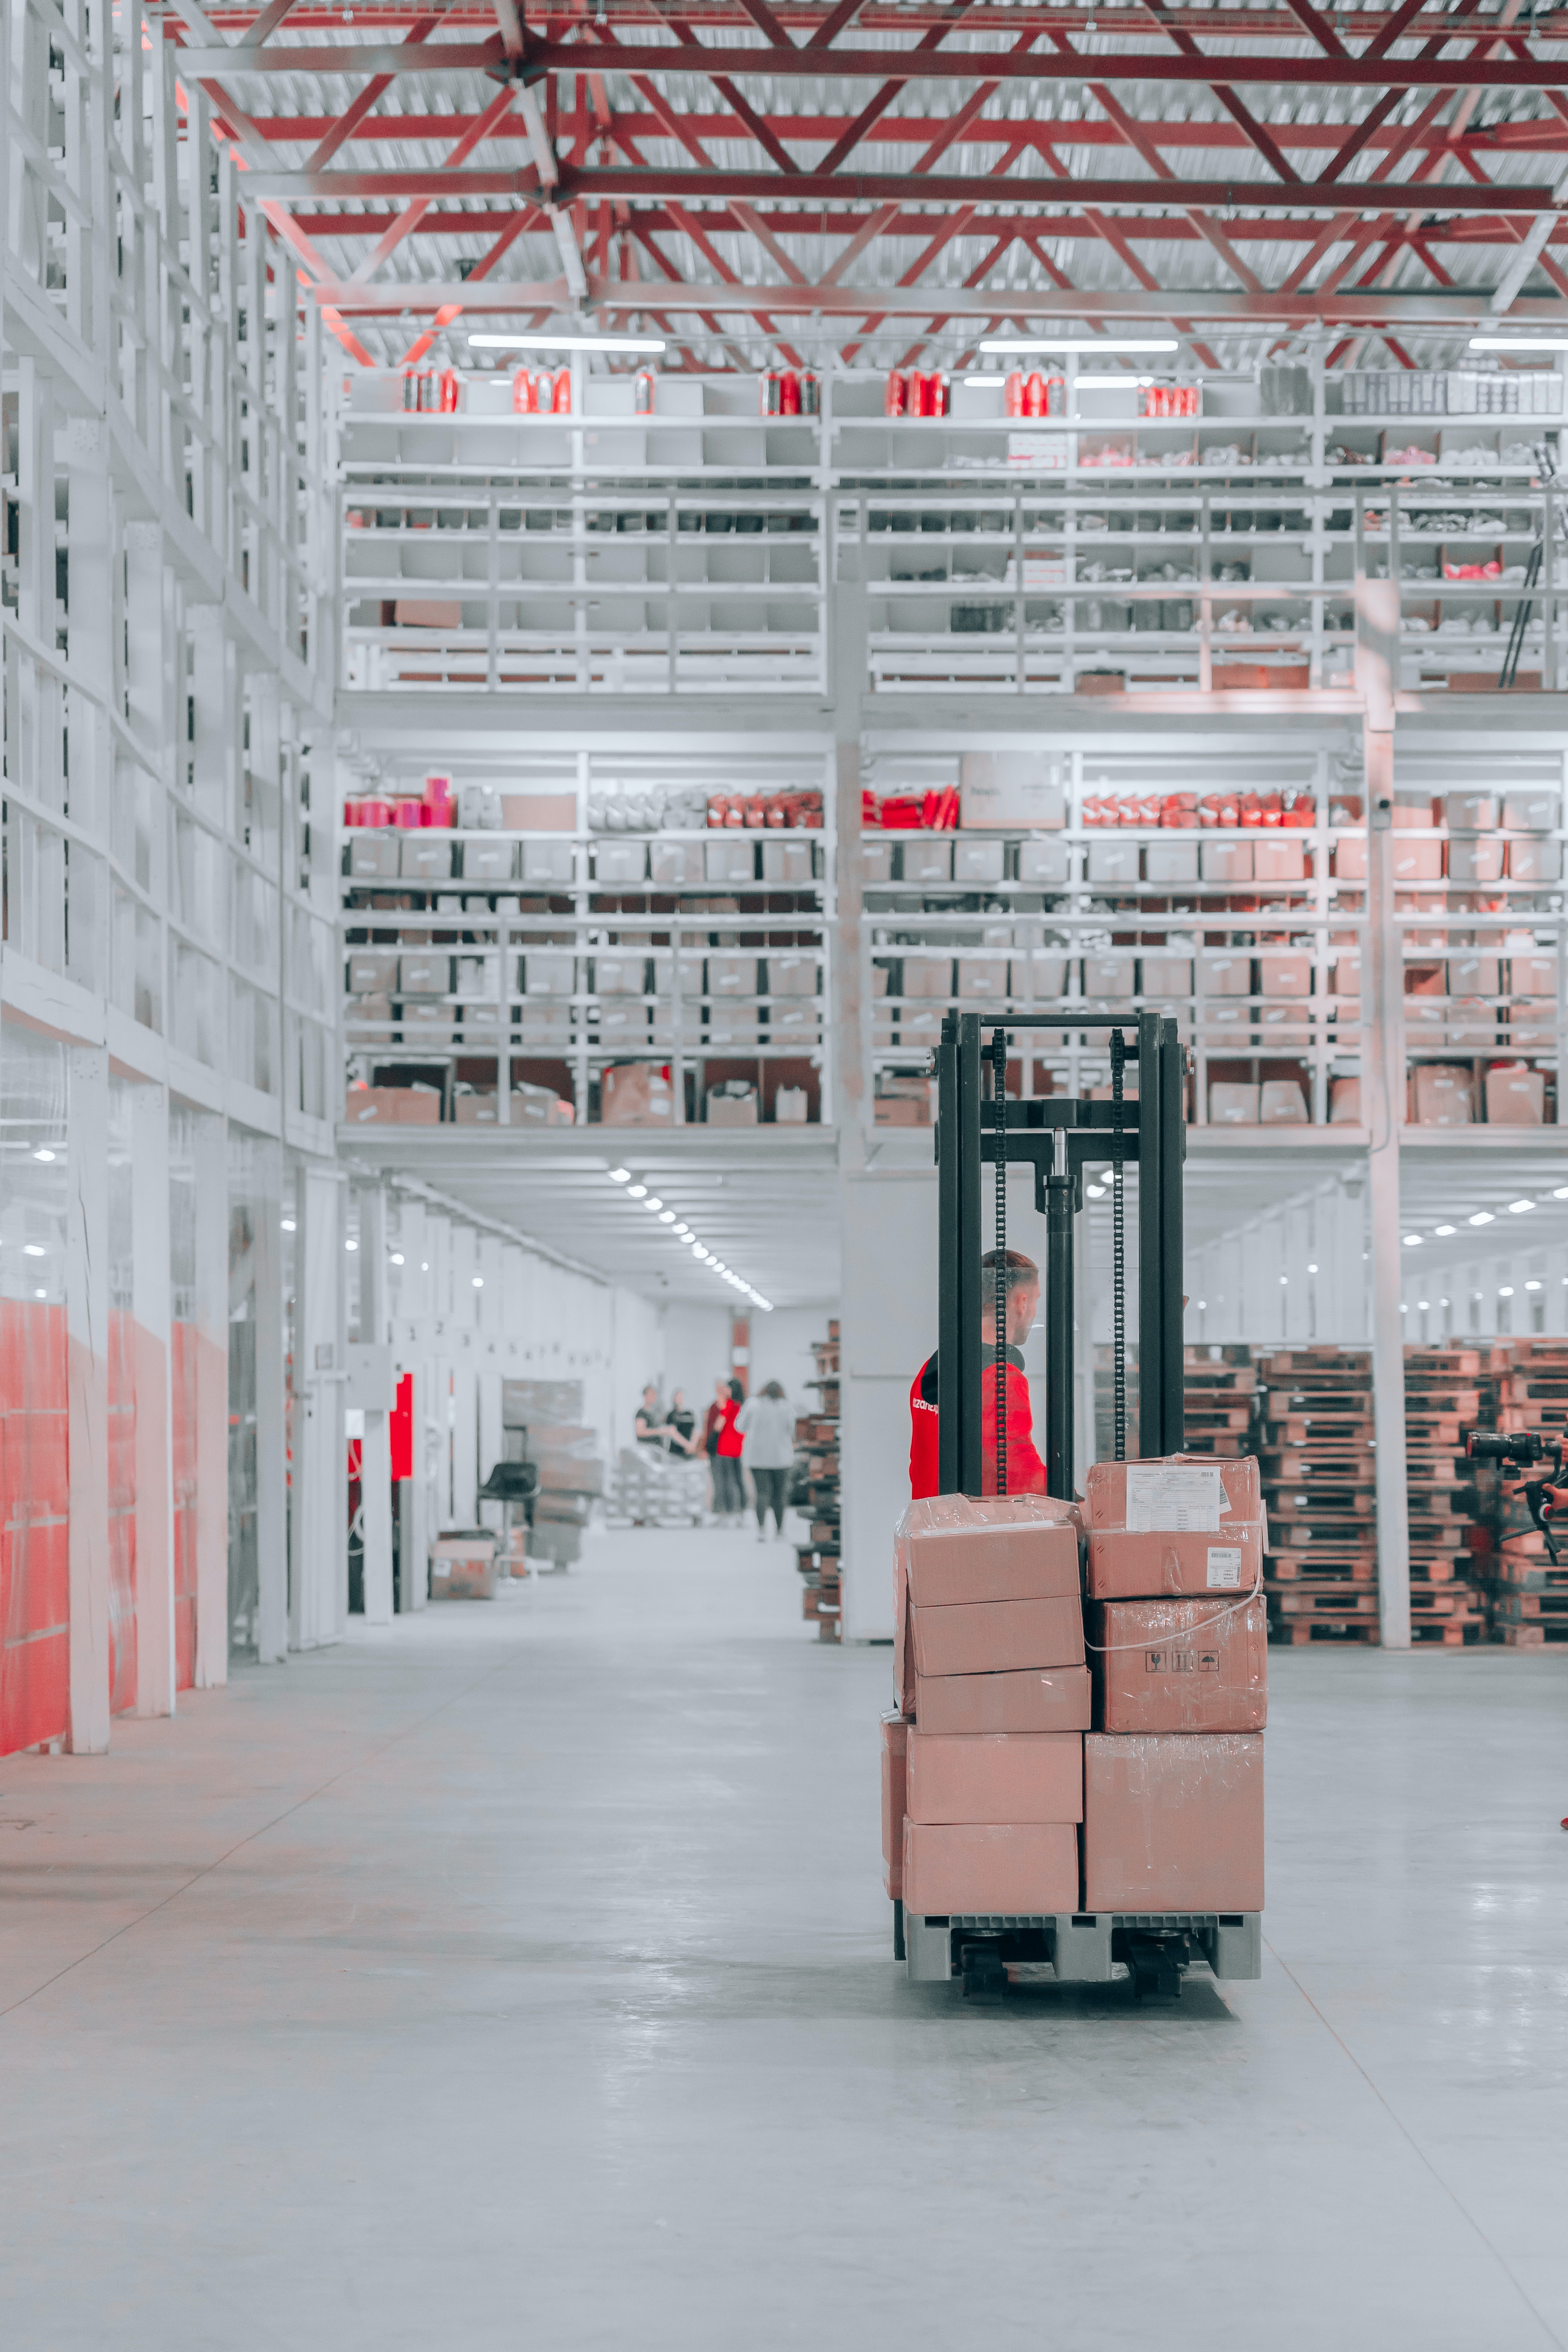 SkuNexus helps eCommerce brands manage their warehouse operations.